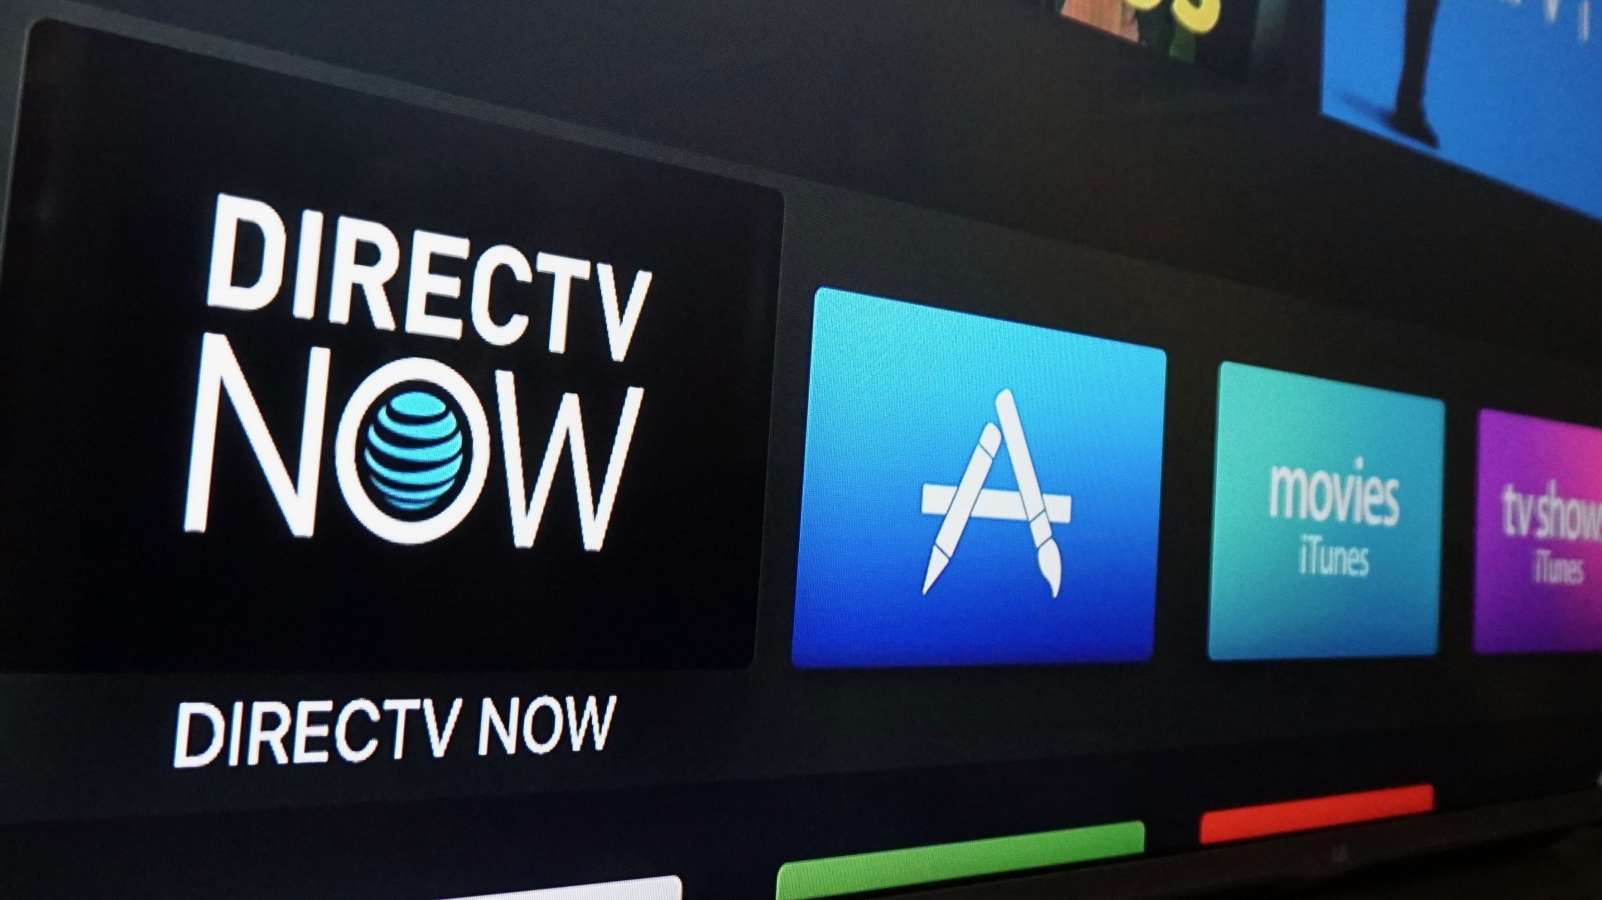 directv-now-to-offer-two-bundles-hike-price-by-10-for-fewer-channels